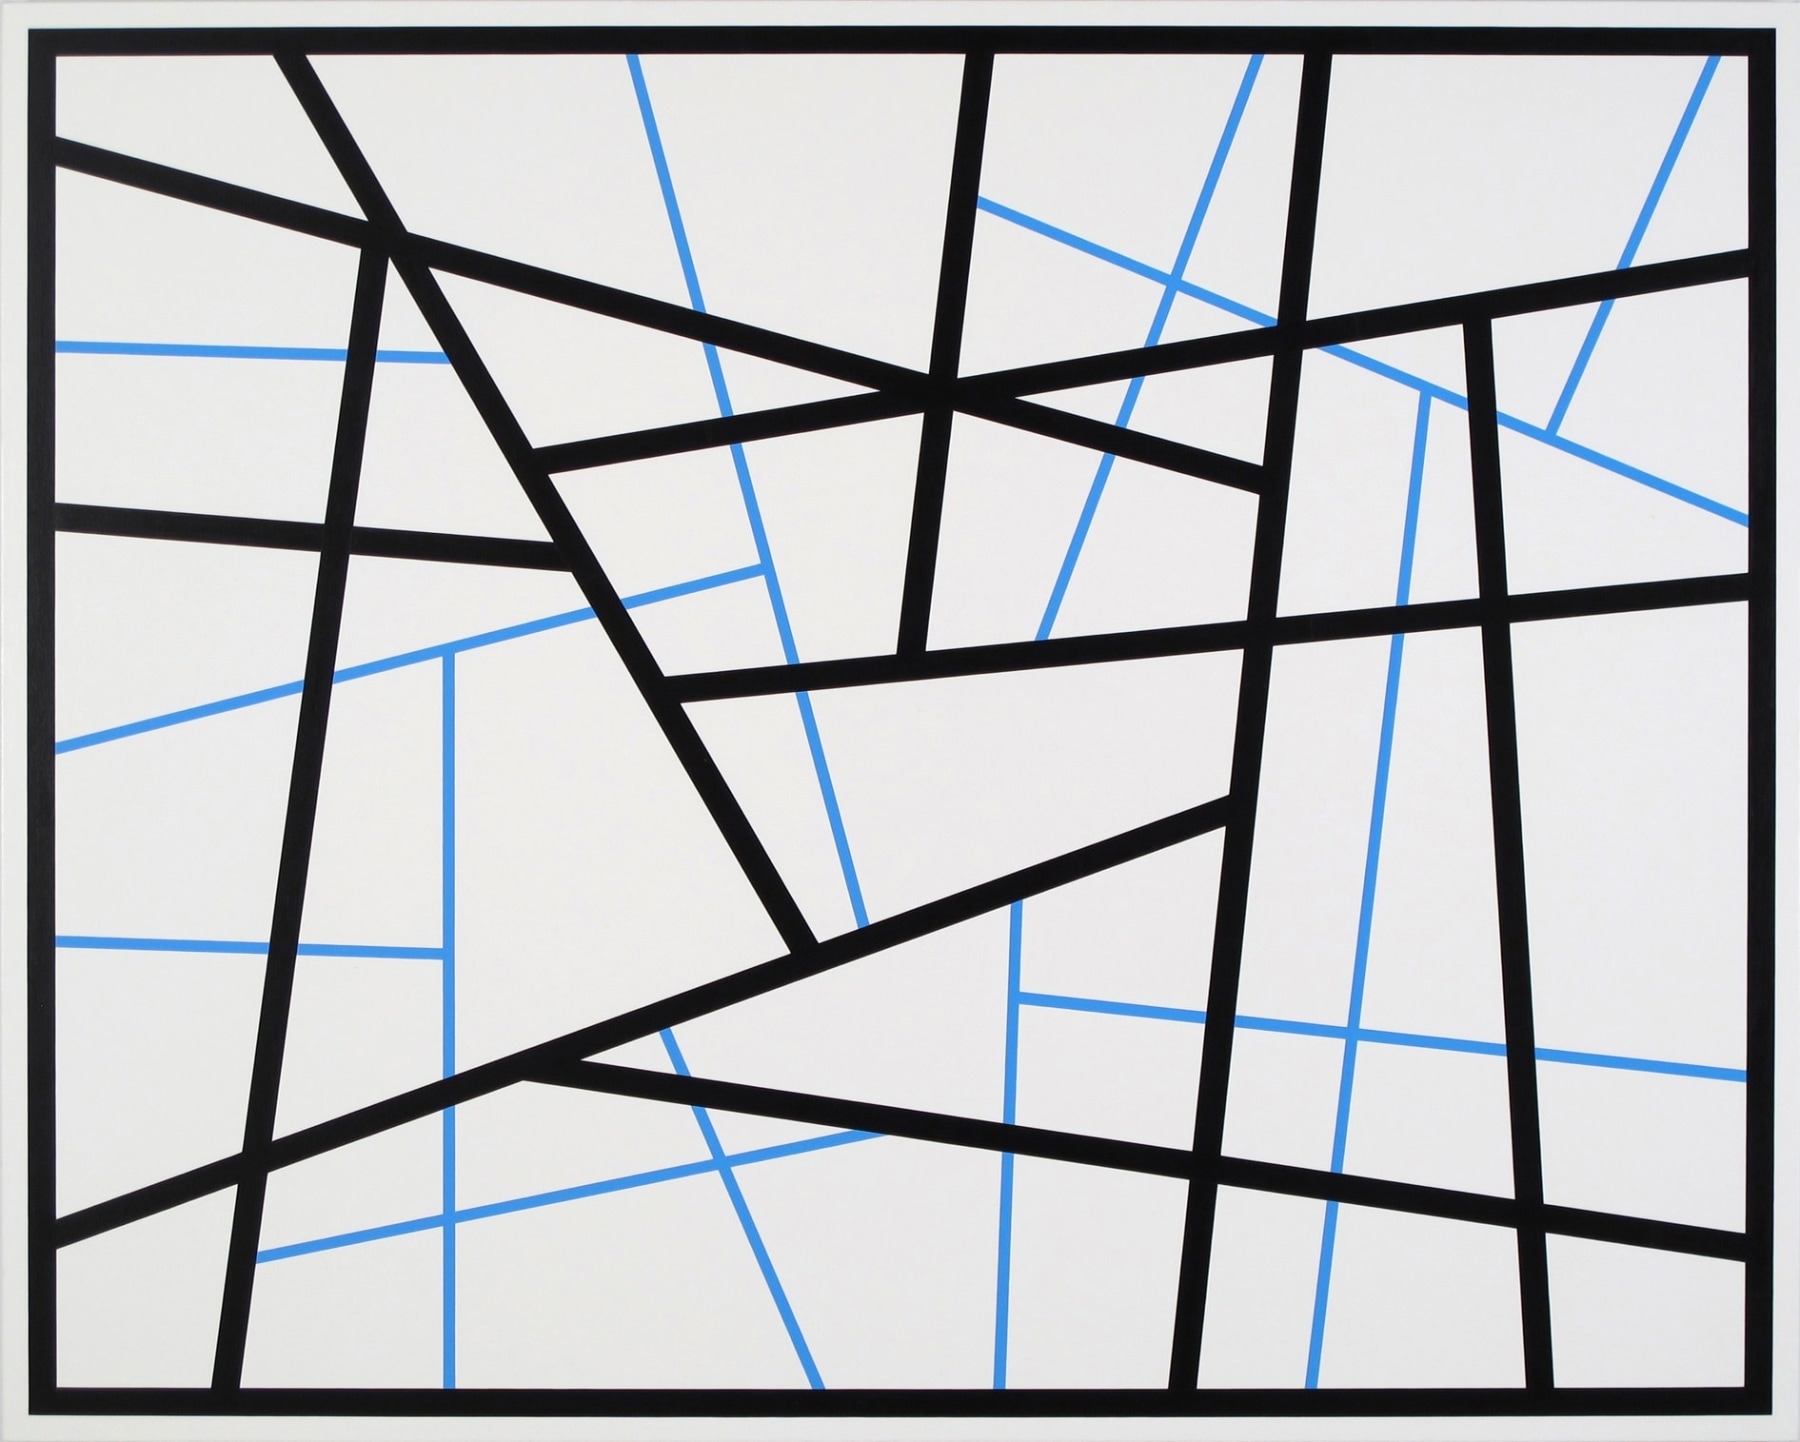 Cary Smith Straight Lines #24 (black-blue), 2015